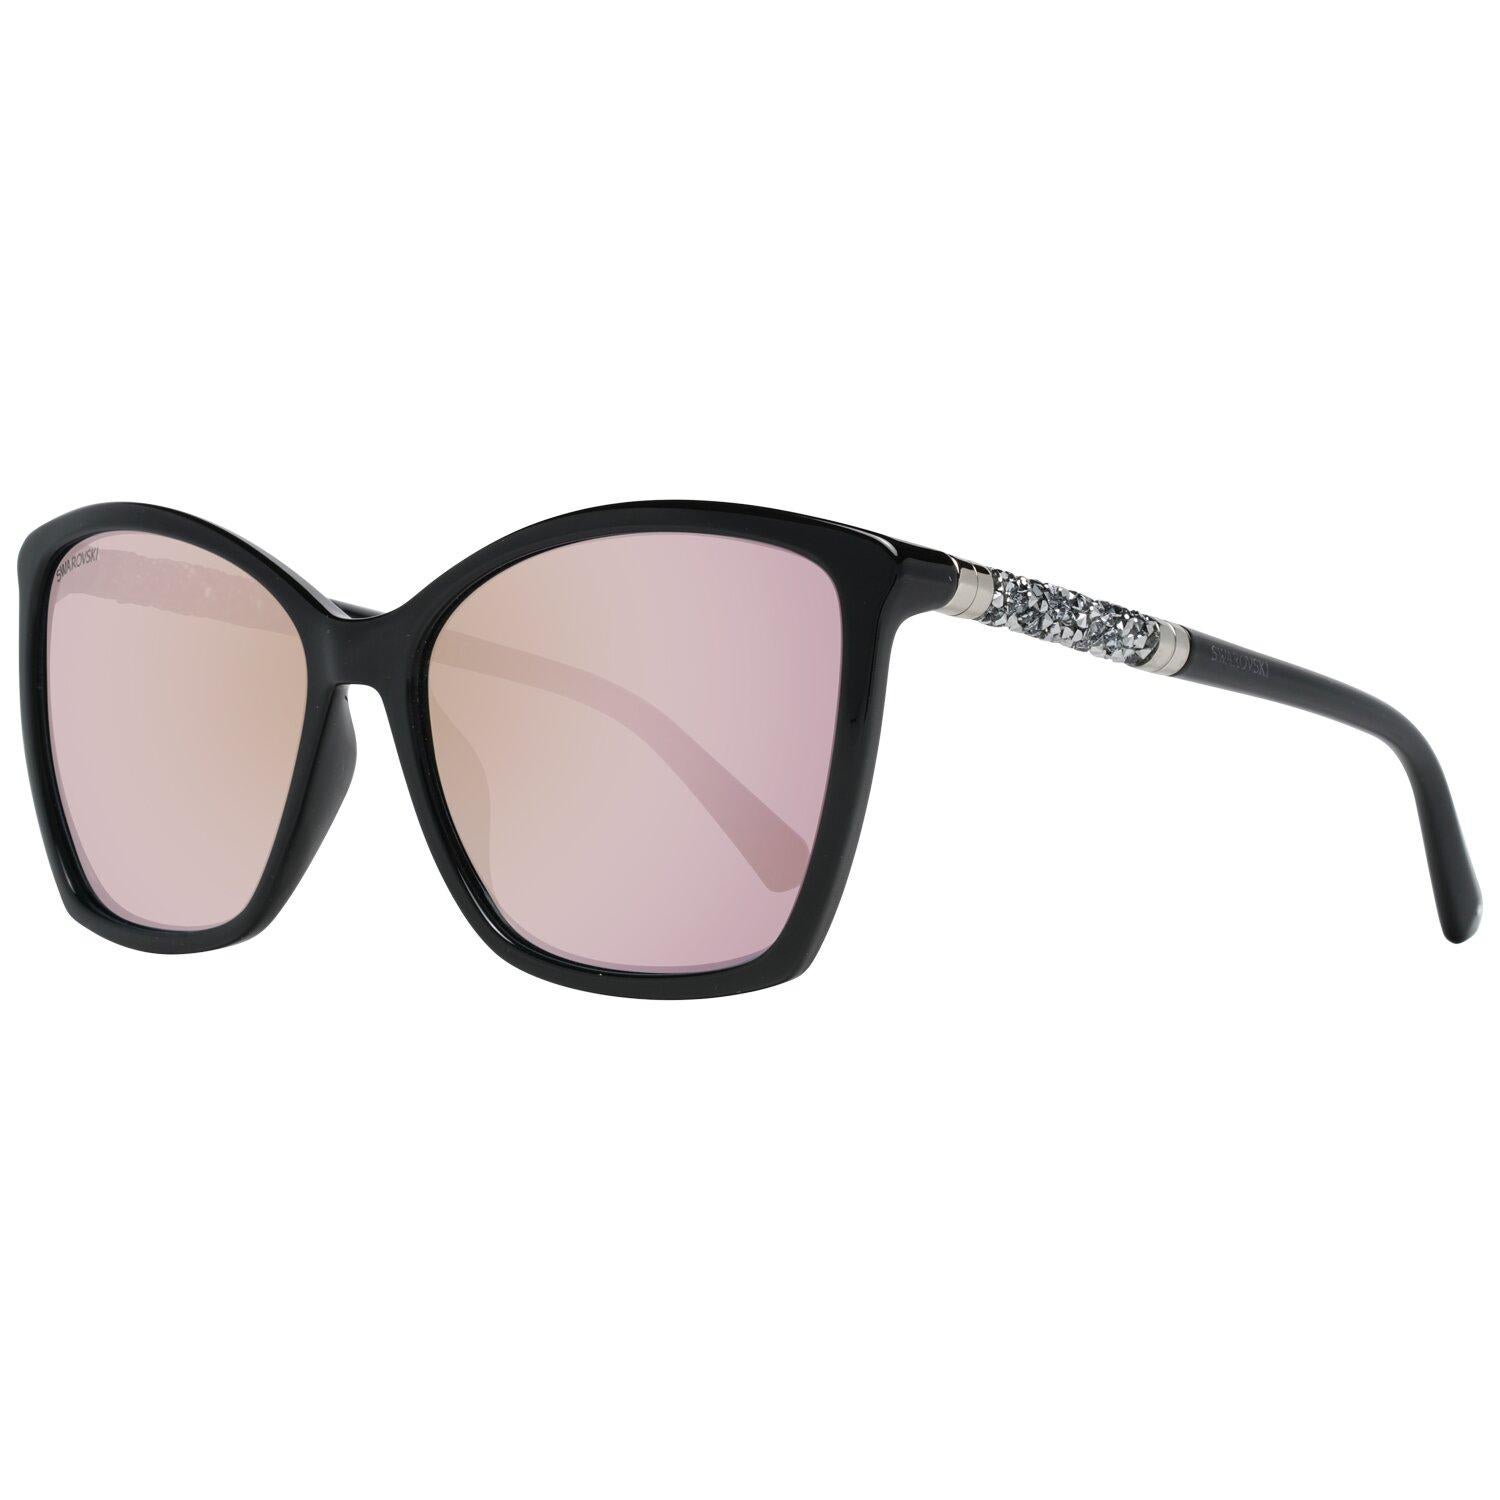 DetailsMATERIAL: AcetateCOLOR: BlackMODEL: SK0148 5601ZGENDER: WomenCOUNTRY OF MANUFACTURE: ChinaTYPE: SunglassesORIGINAL CASE?: YesSTYLE: ButterflyOCCASION: CasualFEATURES: LightweightLENS COLOR: PurpleLENS TECHNOLOGY: MirroredYEAR MANUFACTURED: